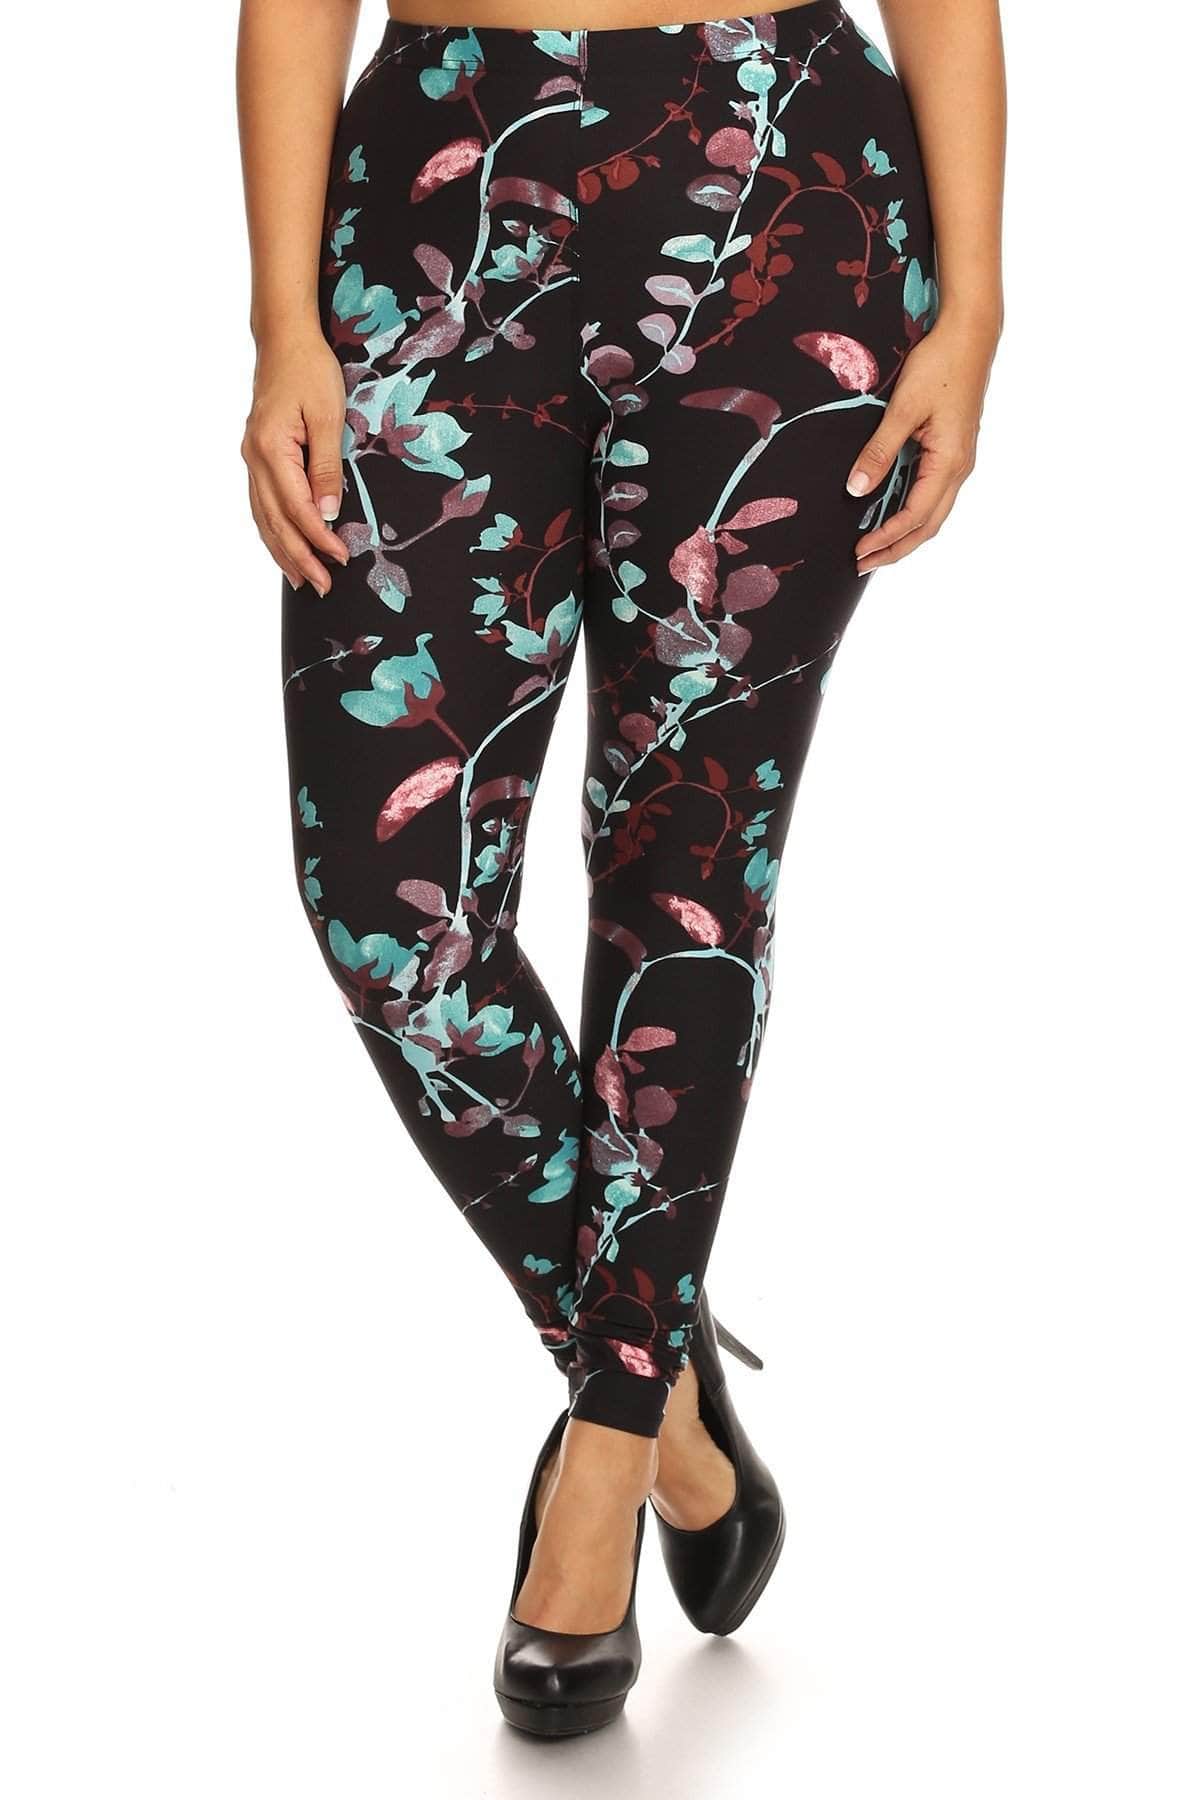 Plus Size Abstract Print, Full Length Leggings In A Slim Fitting Style With A Banded High Waist-[Adult]-[Female]-Multi-Blue Zone Planet